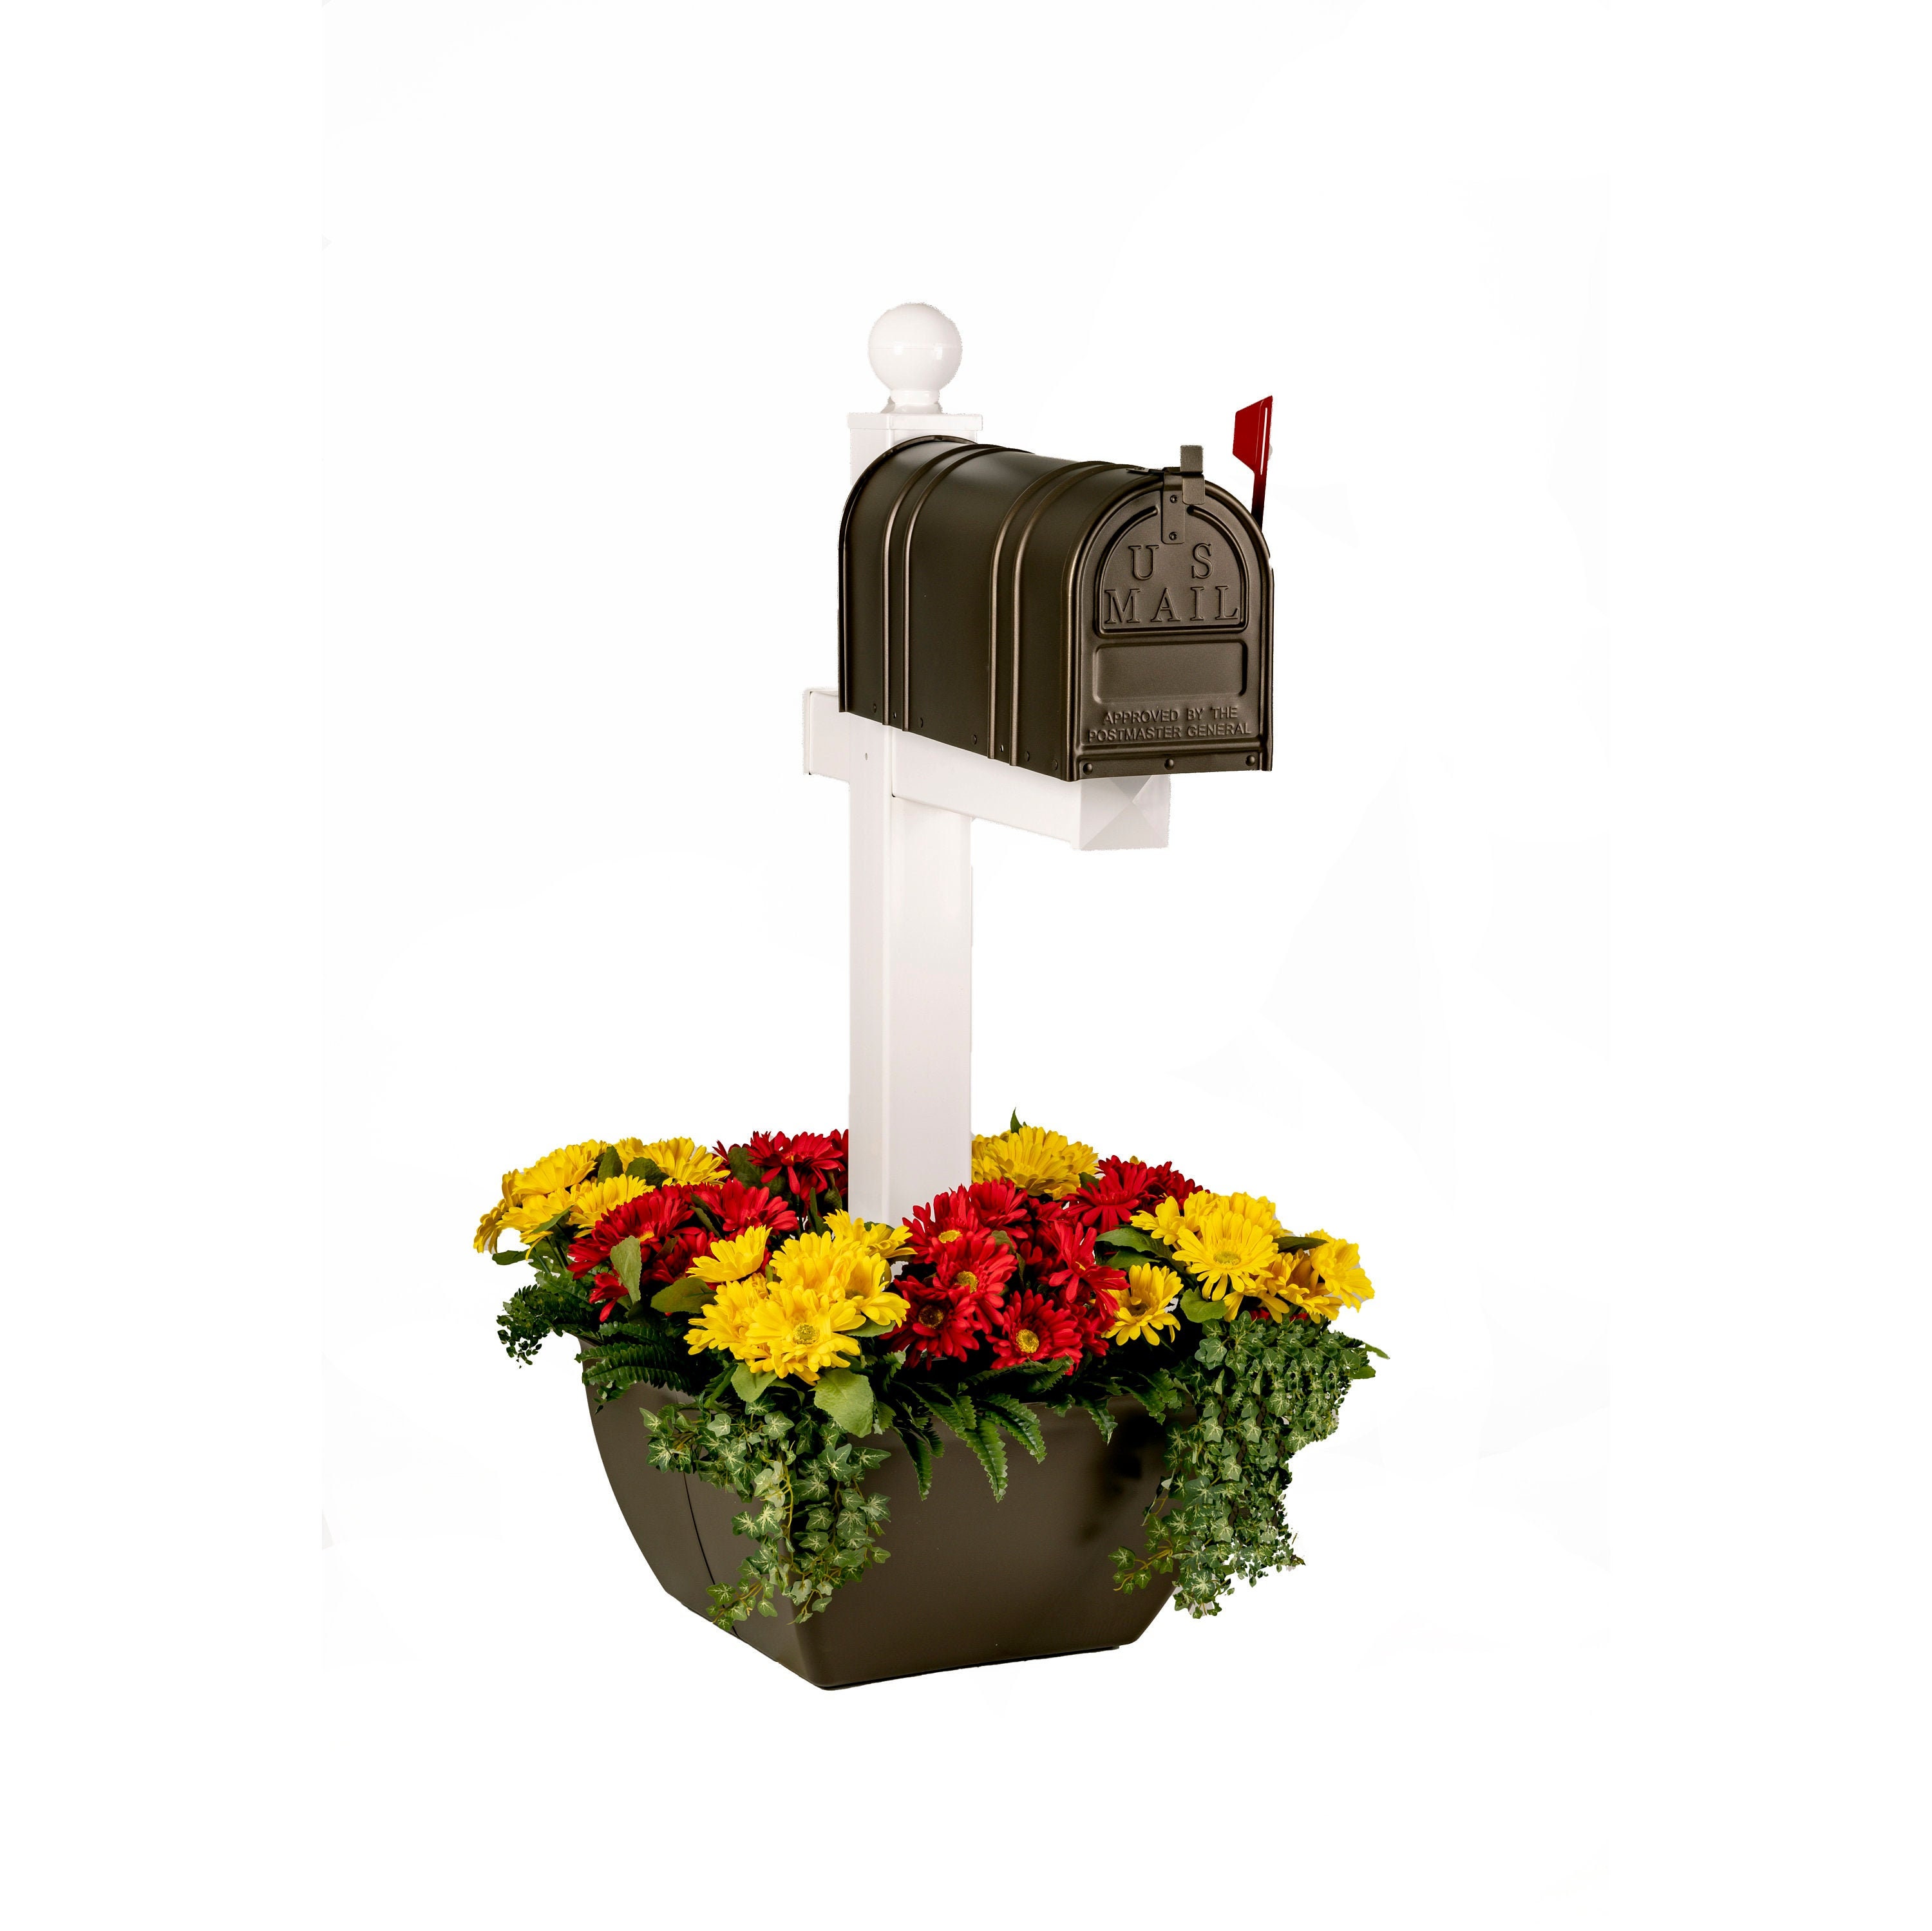 Snappot Mailbox Post Planter Brown, Flower Pots That Go Around A Pole